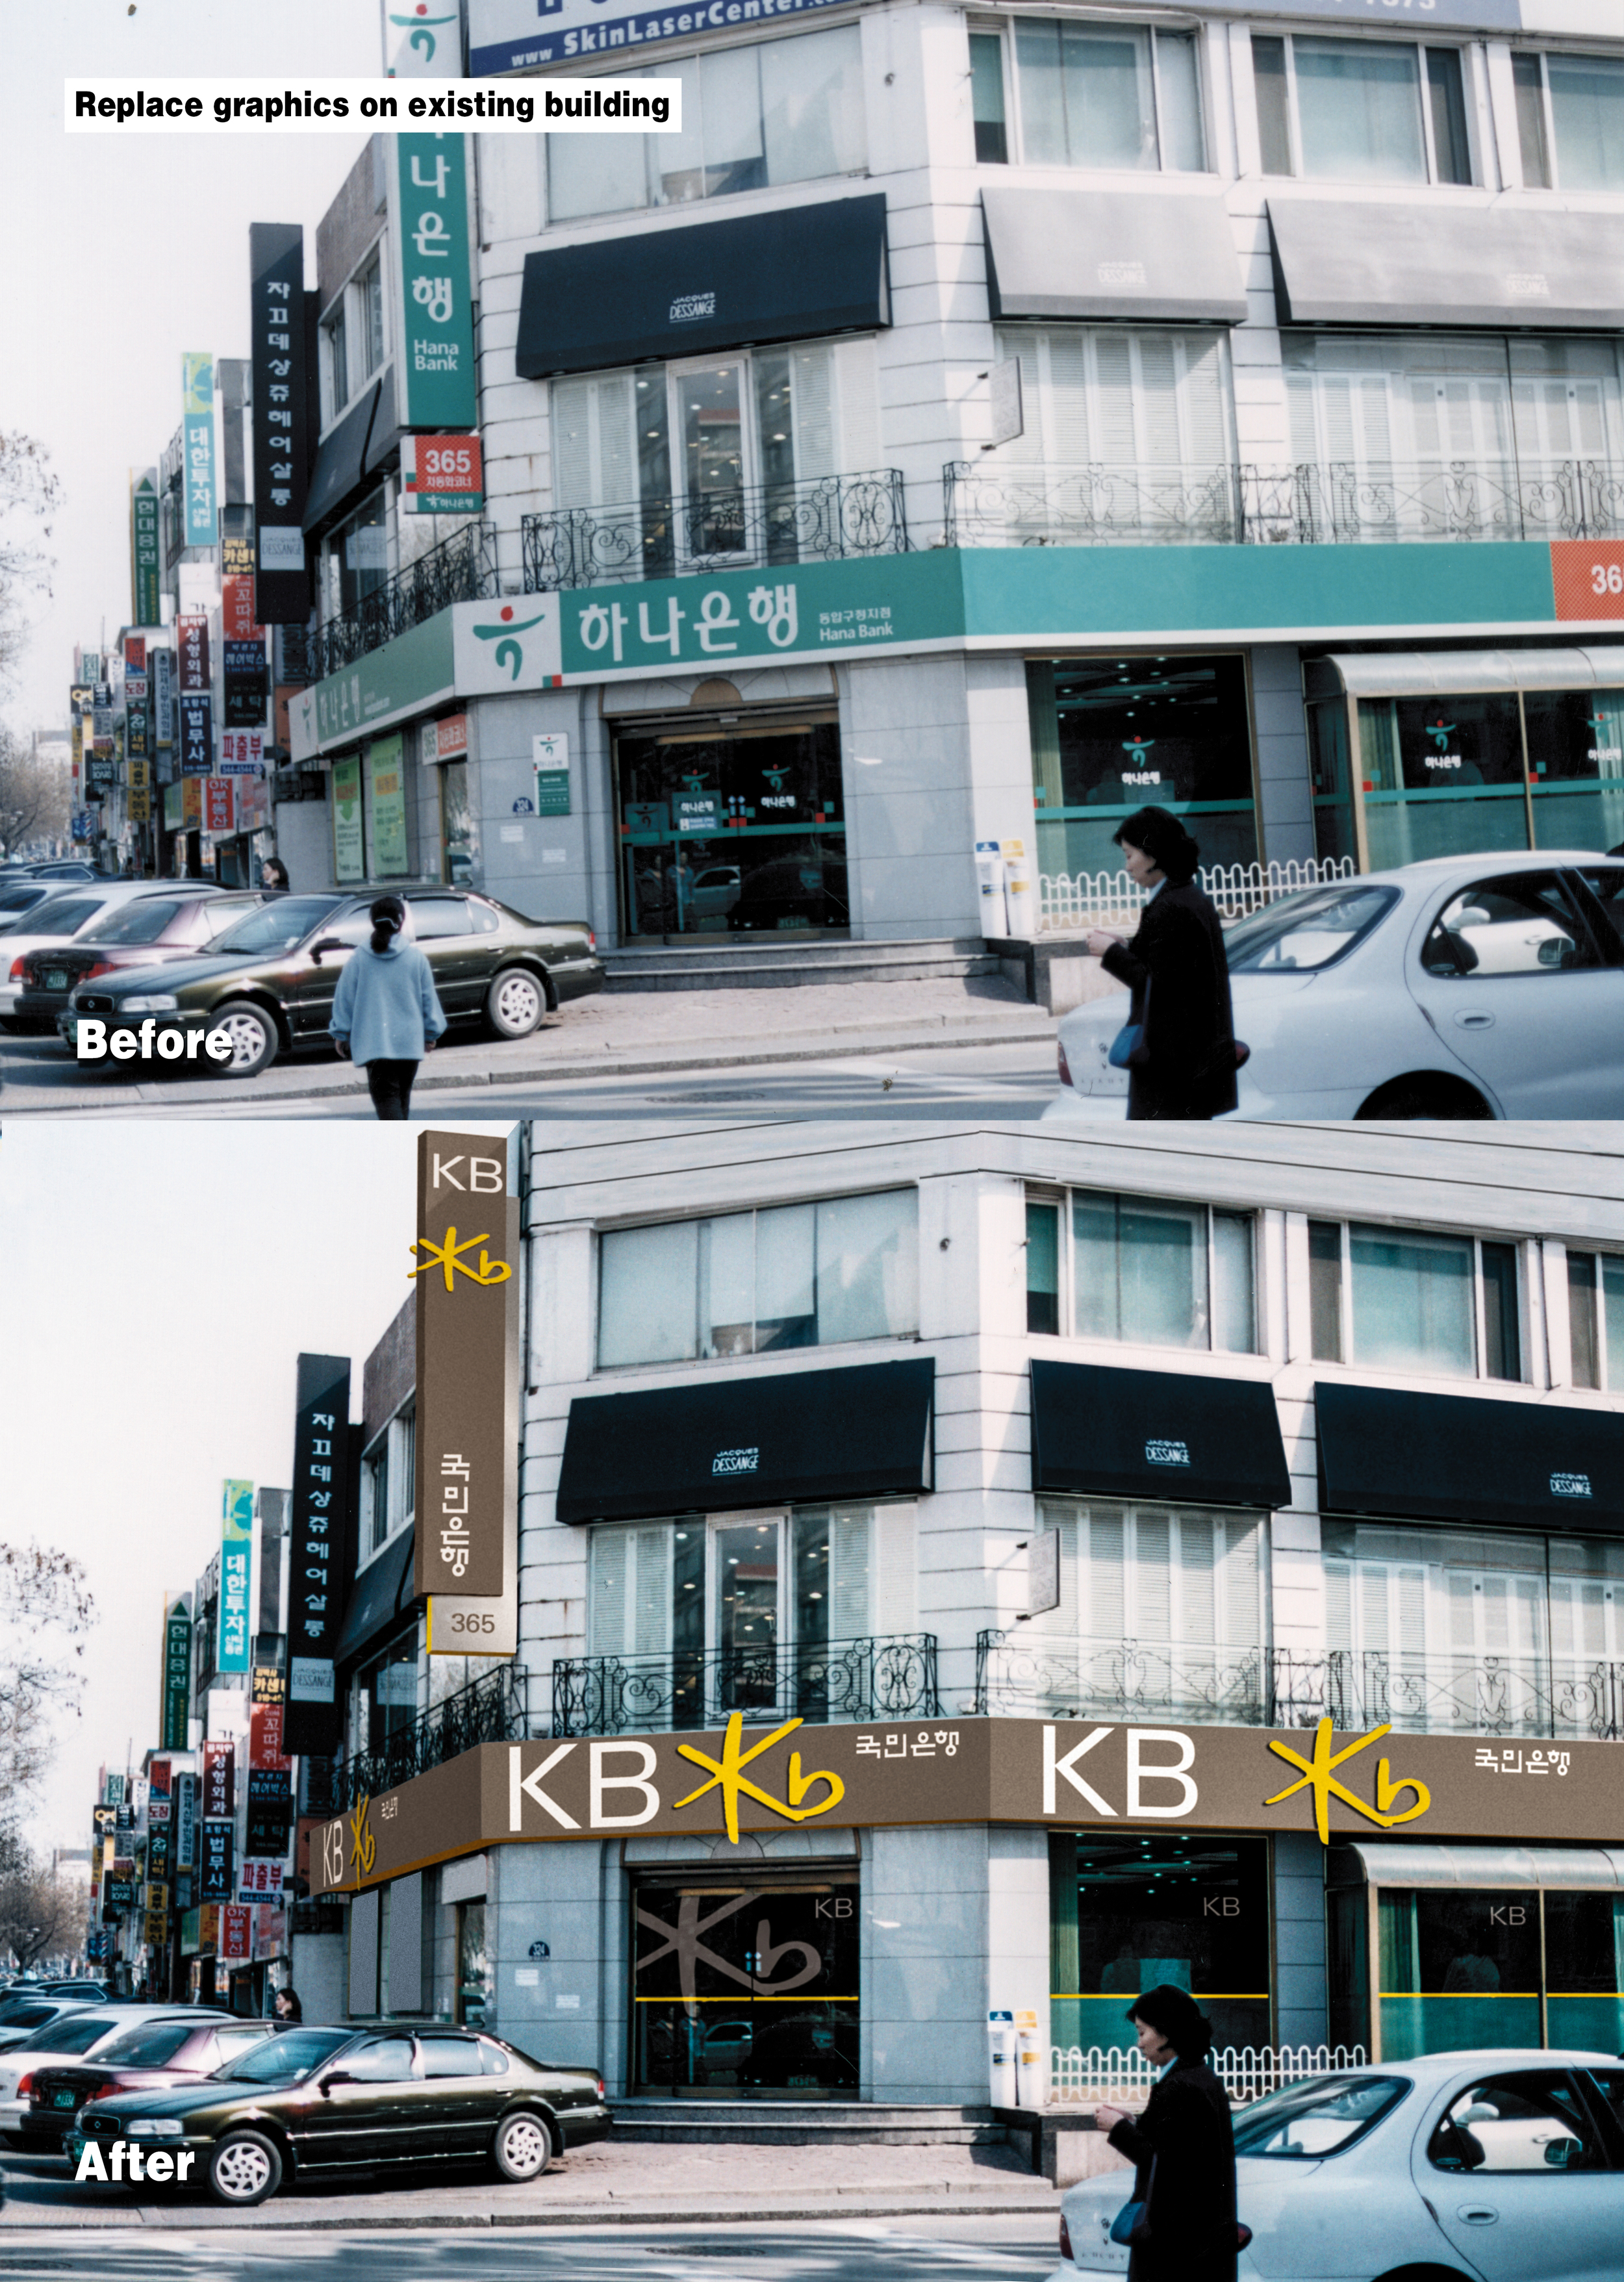  Client: Landor / KB Bank (Korea)  Assignment: Take top image and replace branding elements with new design. 